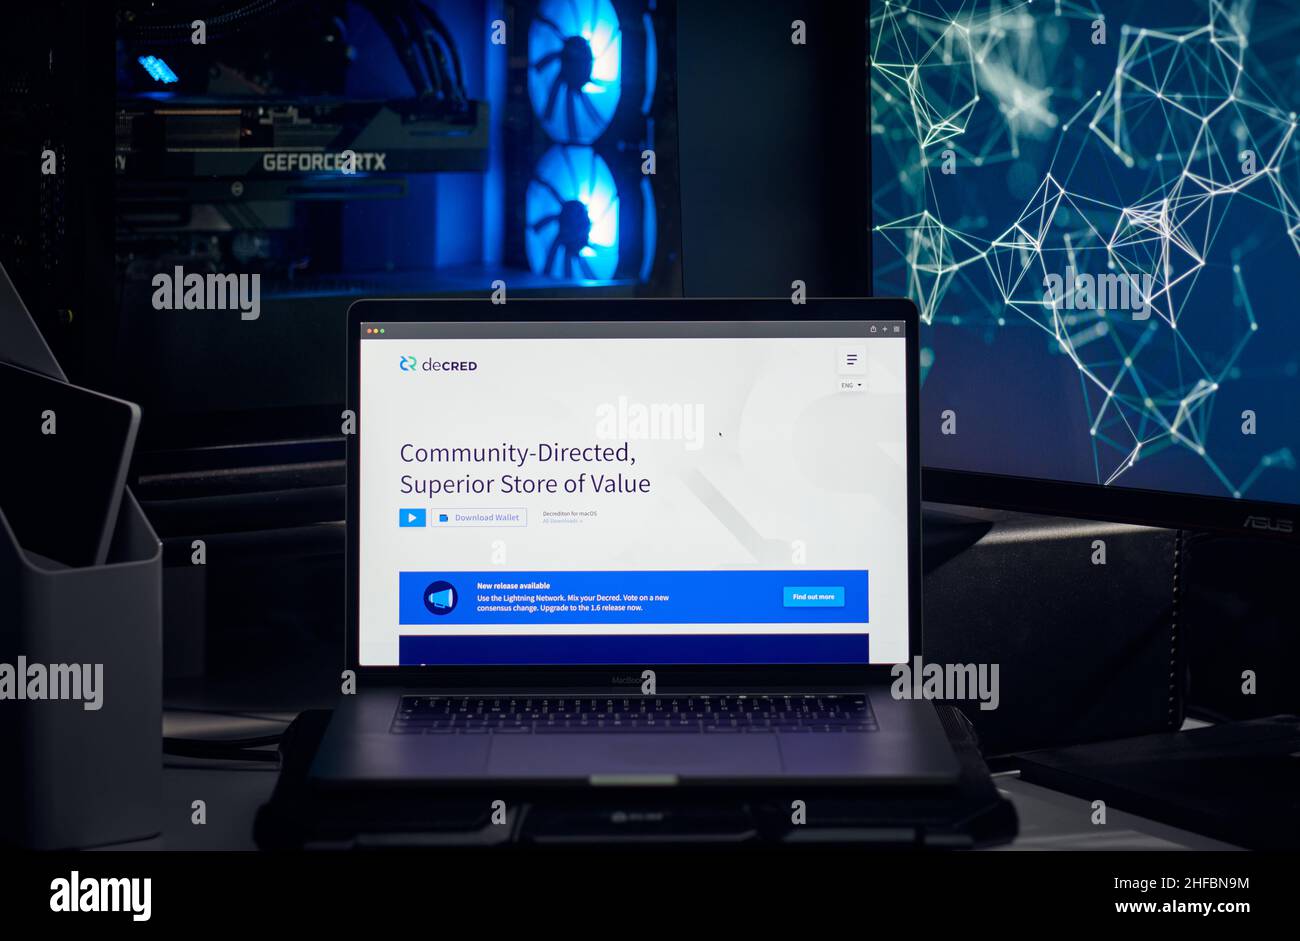 Milan, Italy - January 11, 2022: decred - DCR website's hp seen on a laptop screen. decred, DCR coin logo visible. Cryptocurrency, defi, nft concepts Stock Photo